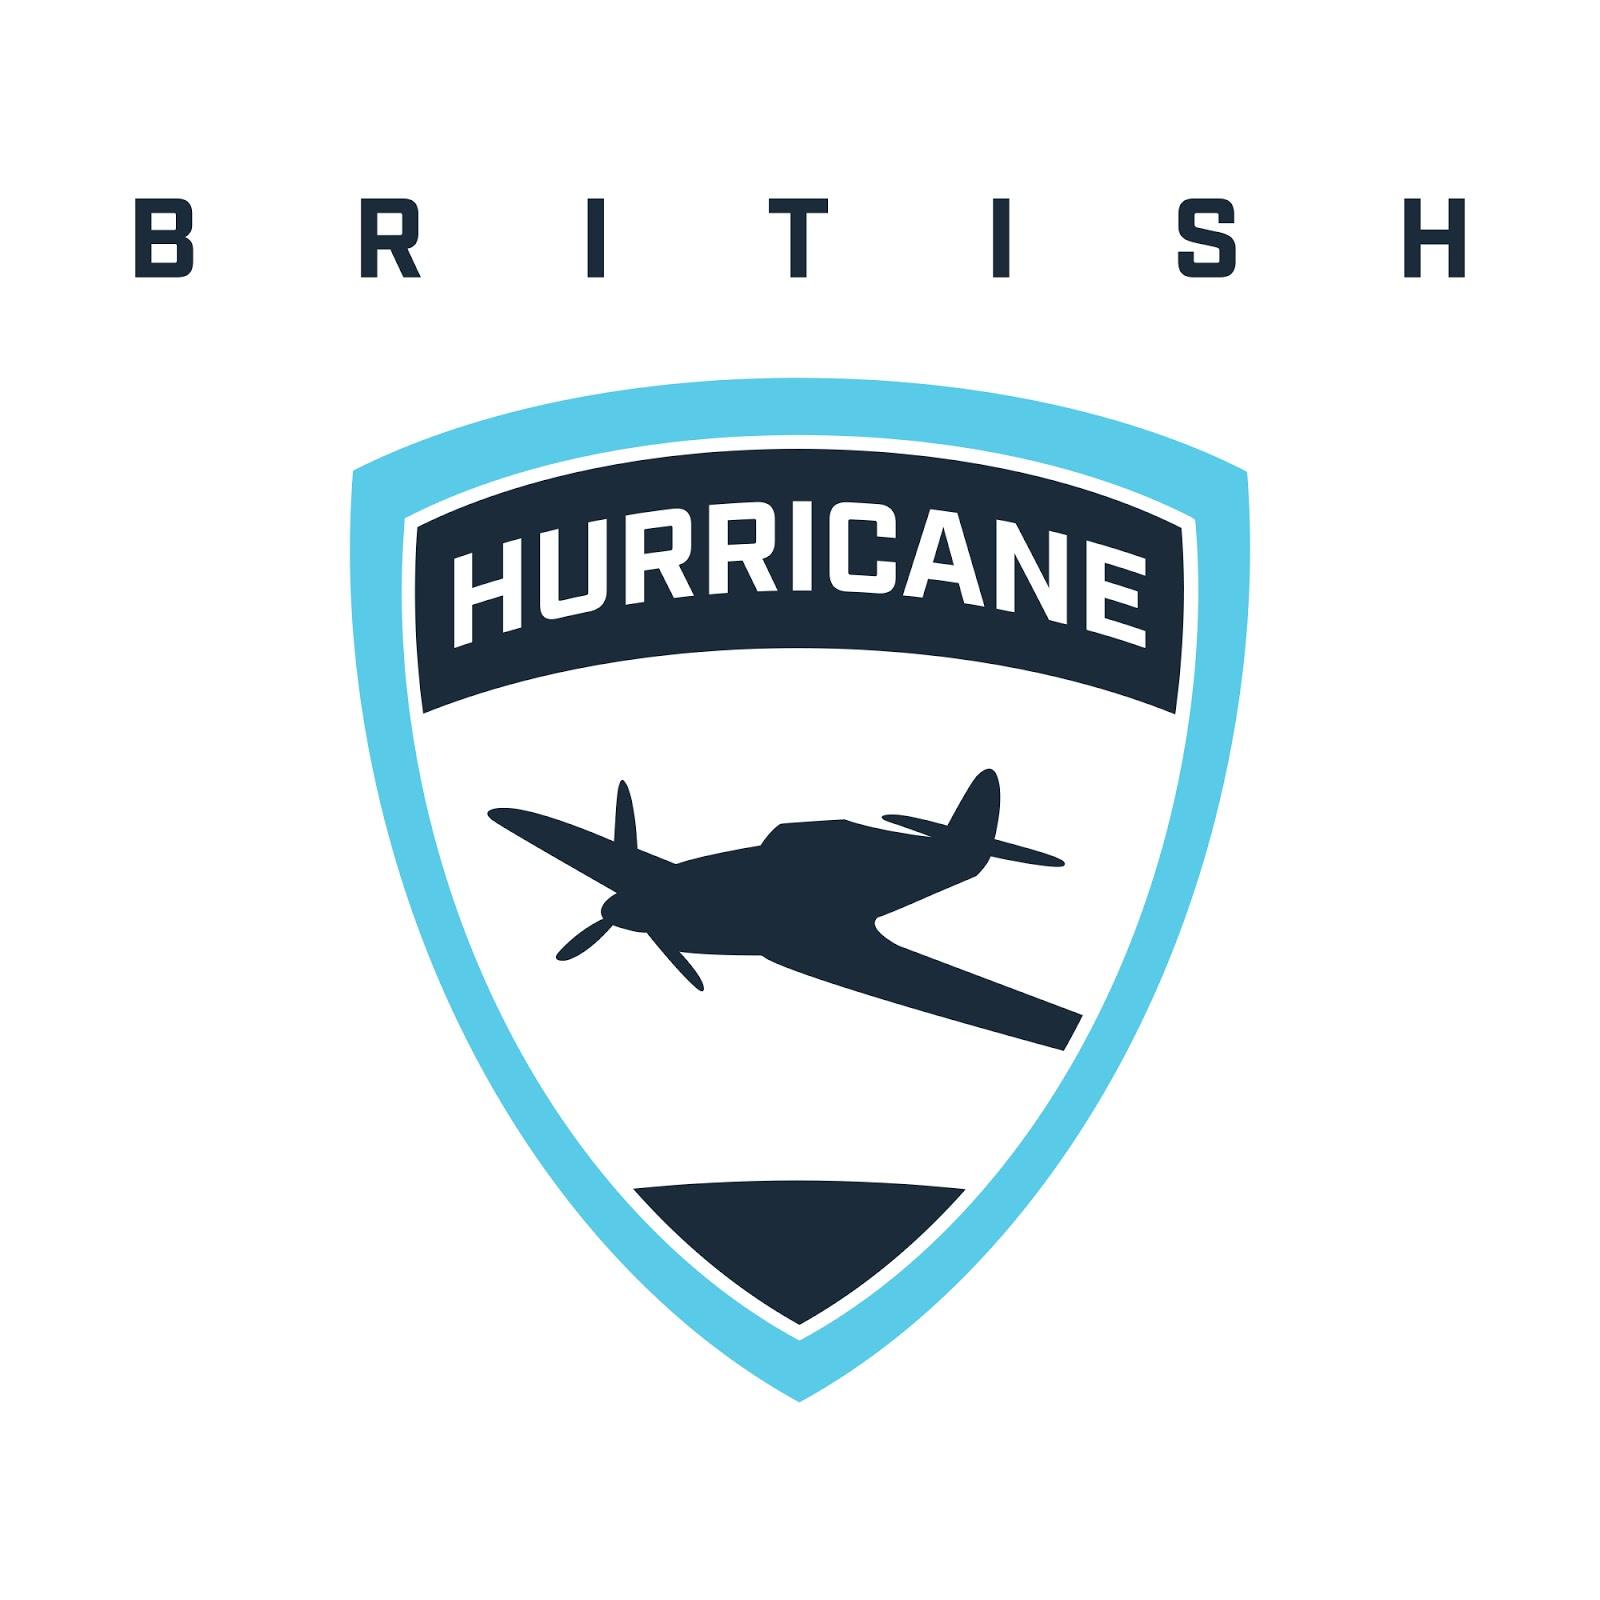 Roster Logo - The British Hurricane Unveil Their Roster and Logo - Break The Game